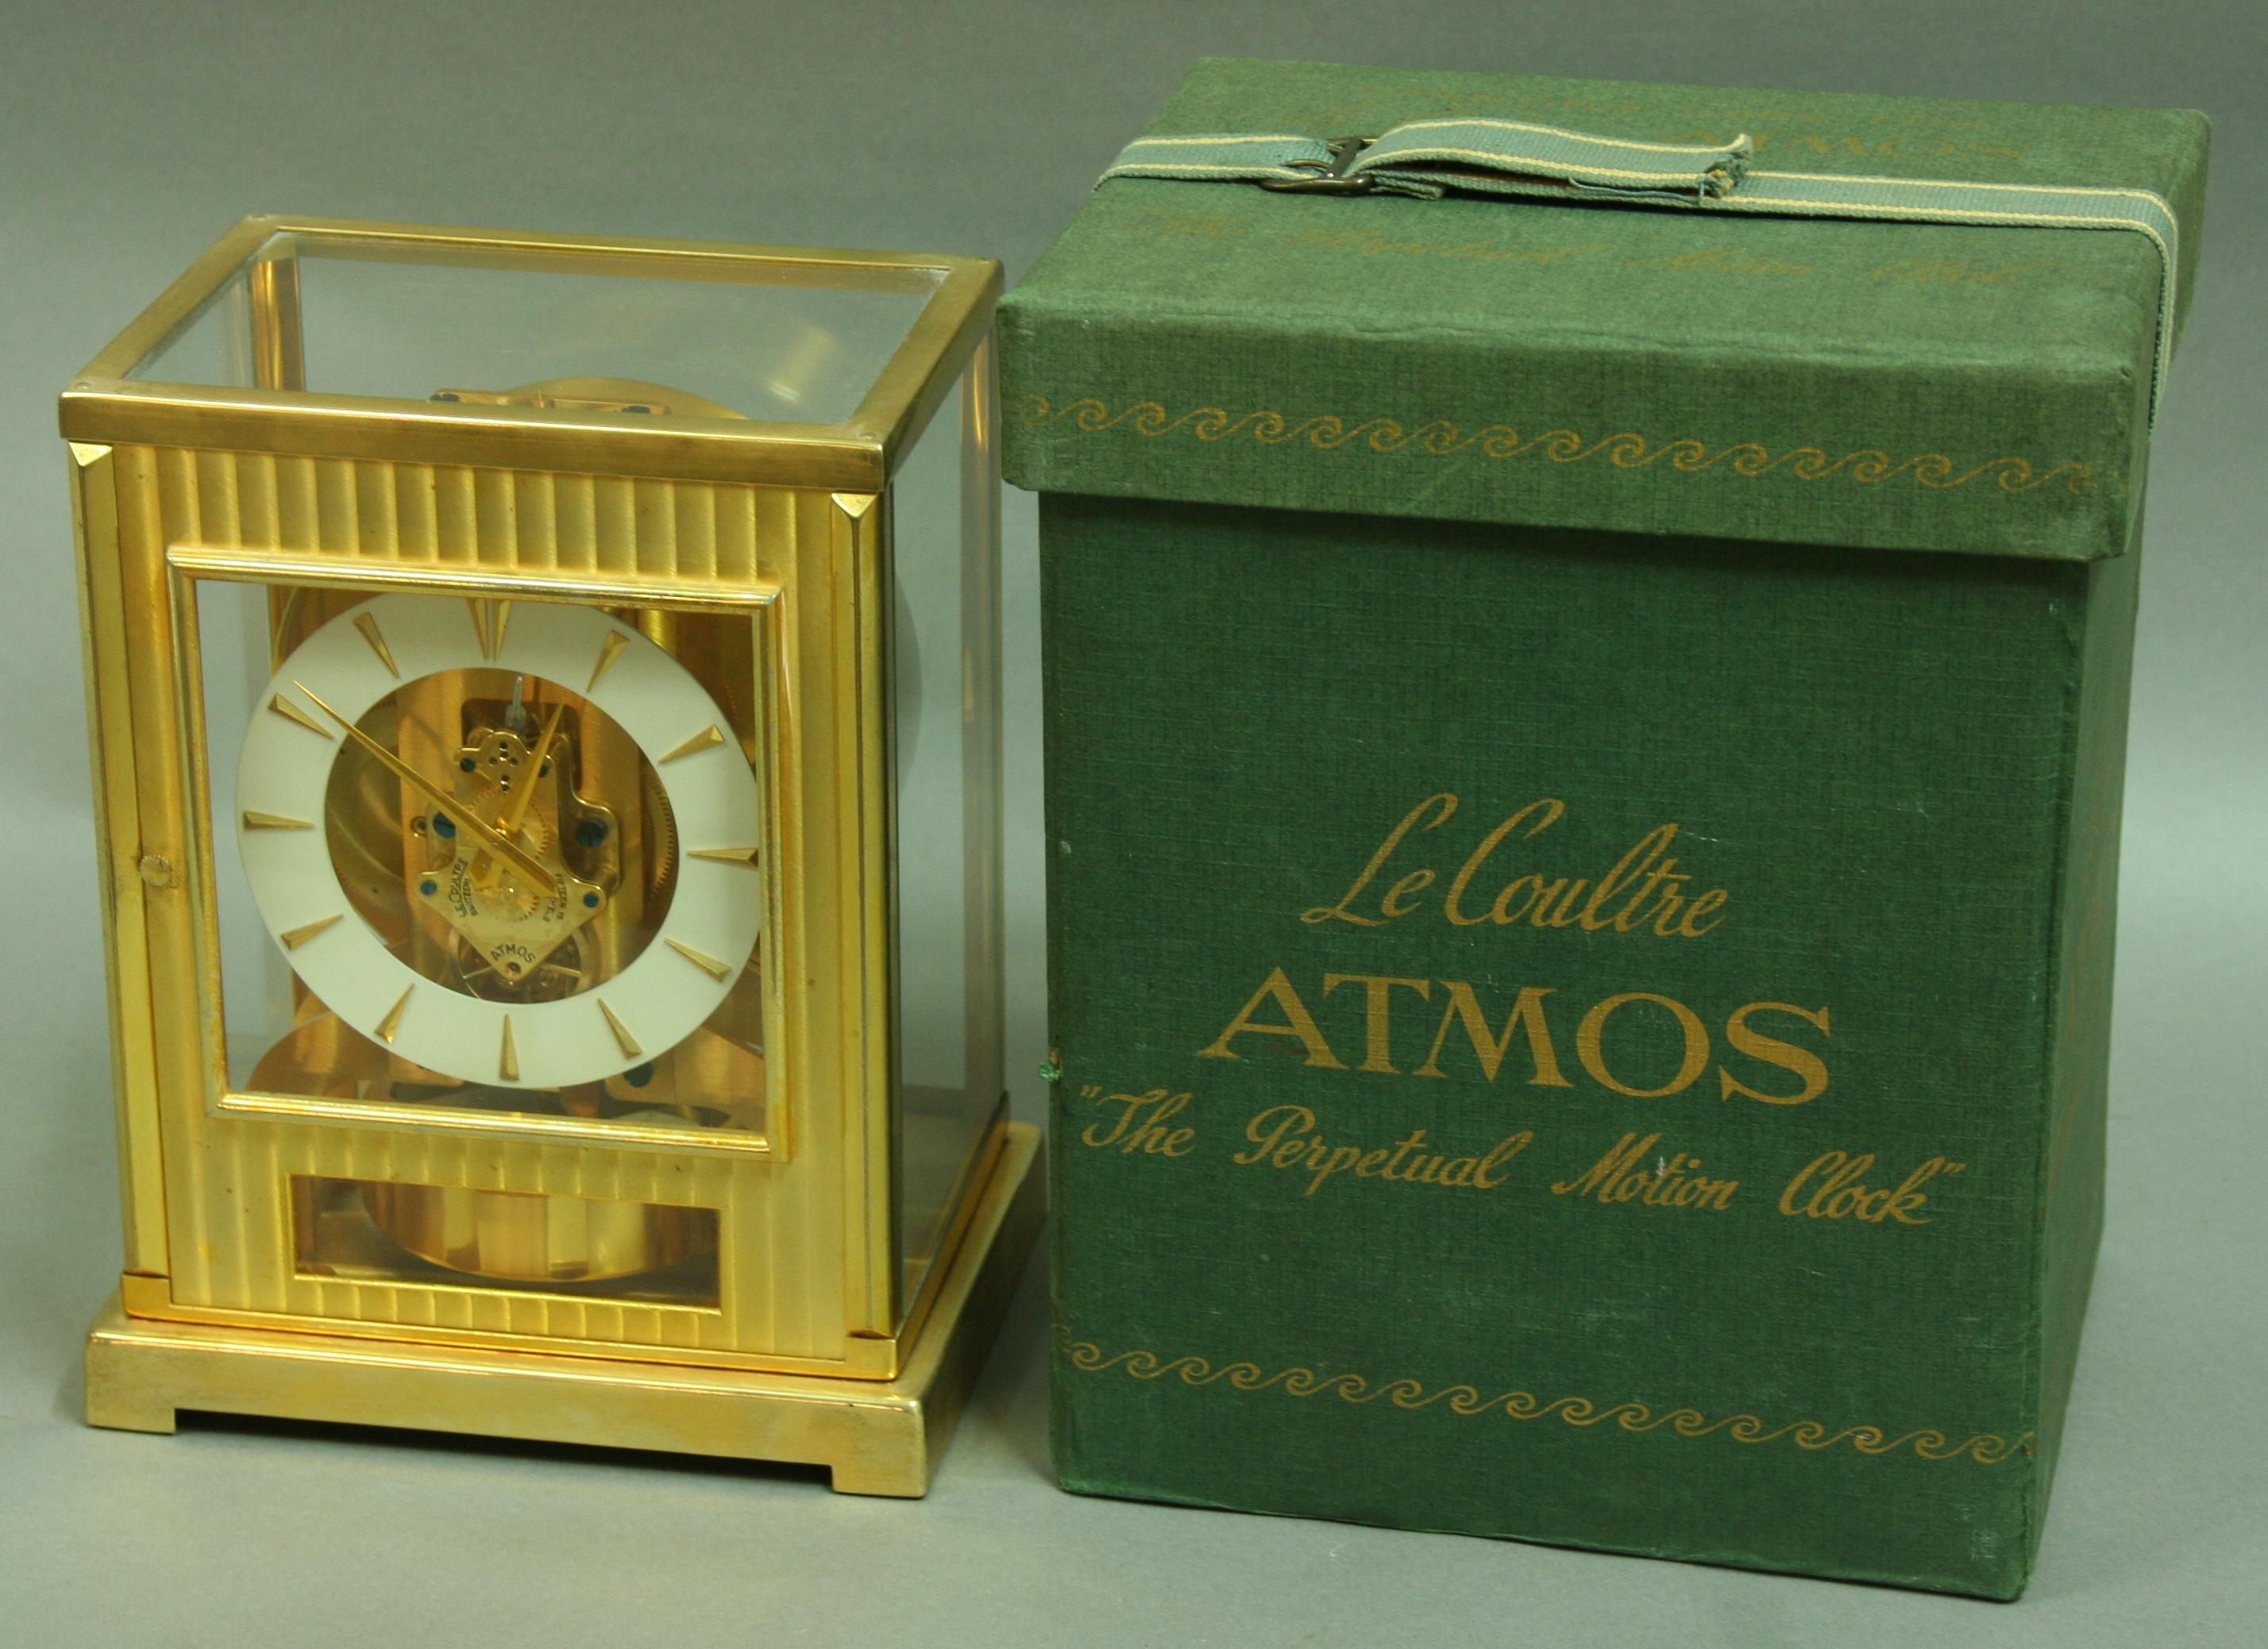 A JAEGER-LE-COULTRE ATMOS CLOCK, 1950's, movement number 60837, with white dial, textured gilt front